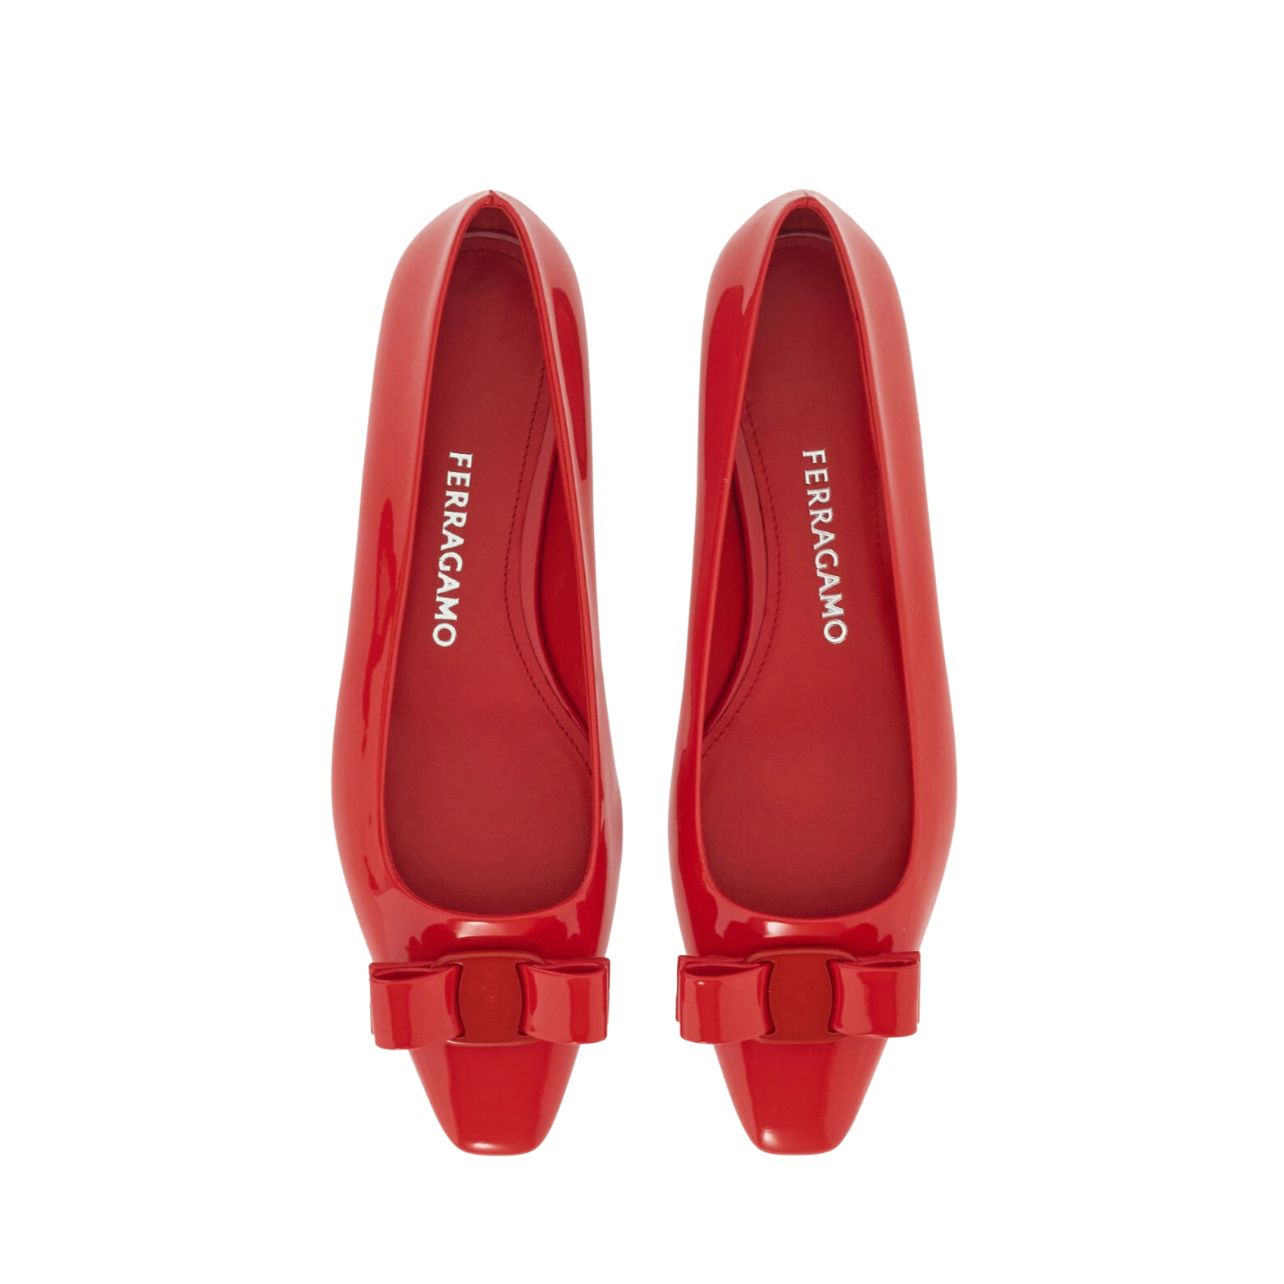 Ferragamo red leather ballet flats with red bow detail